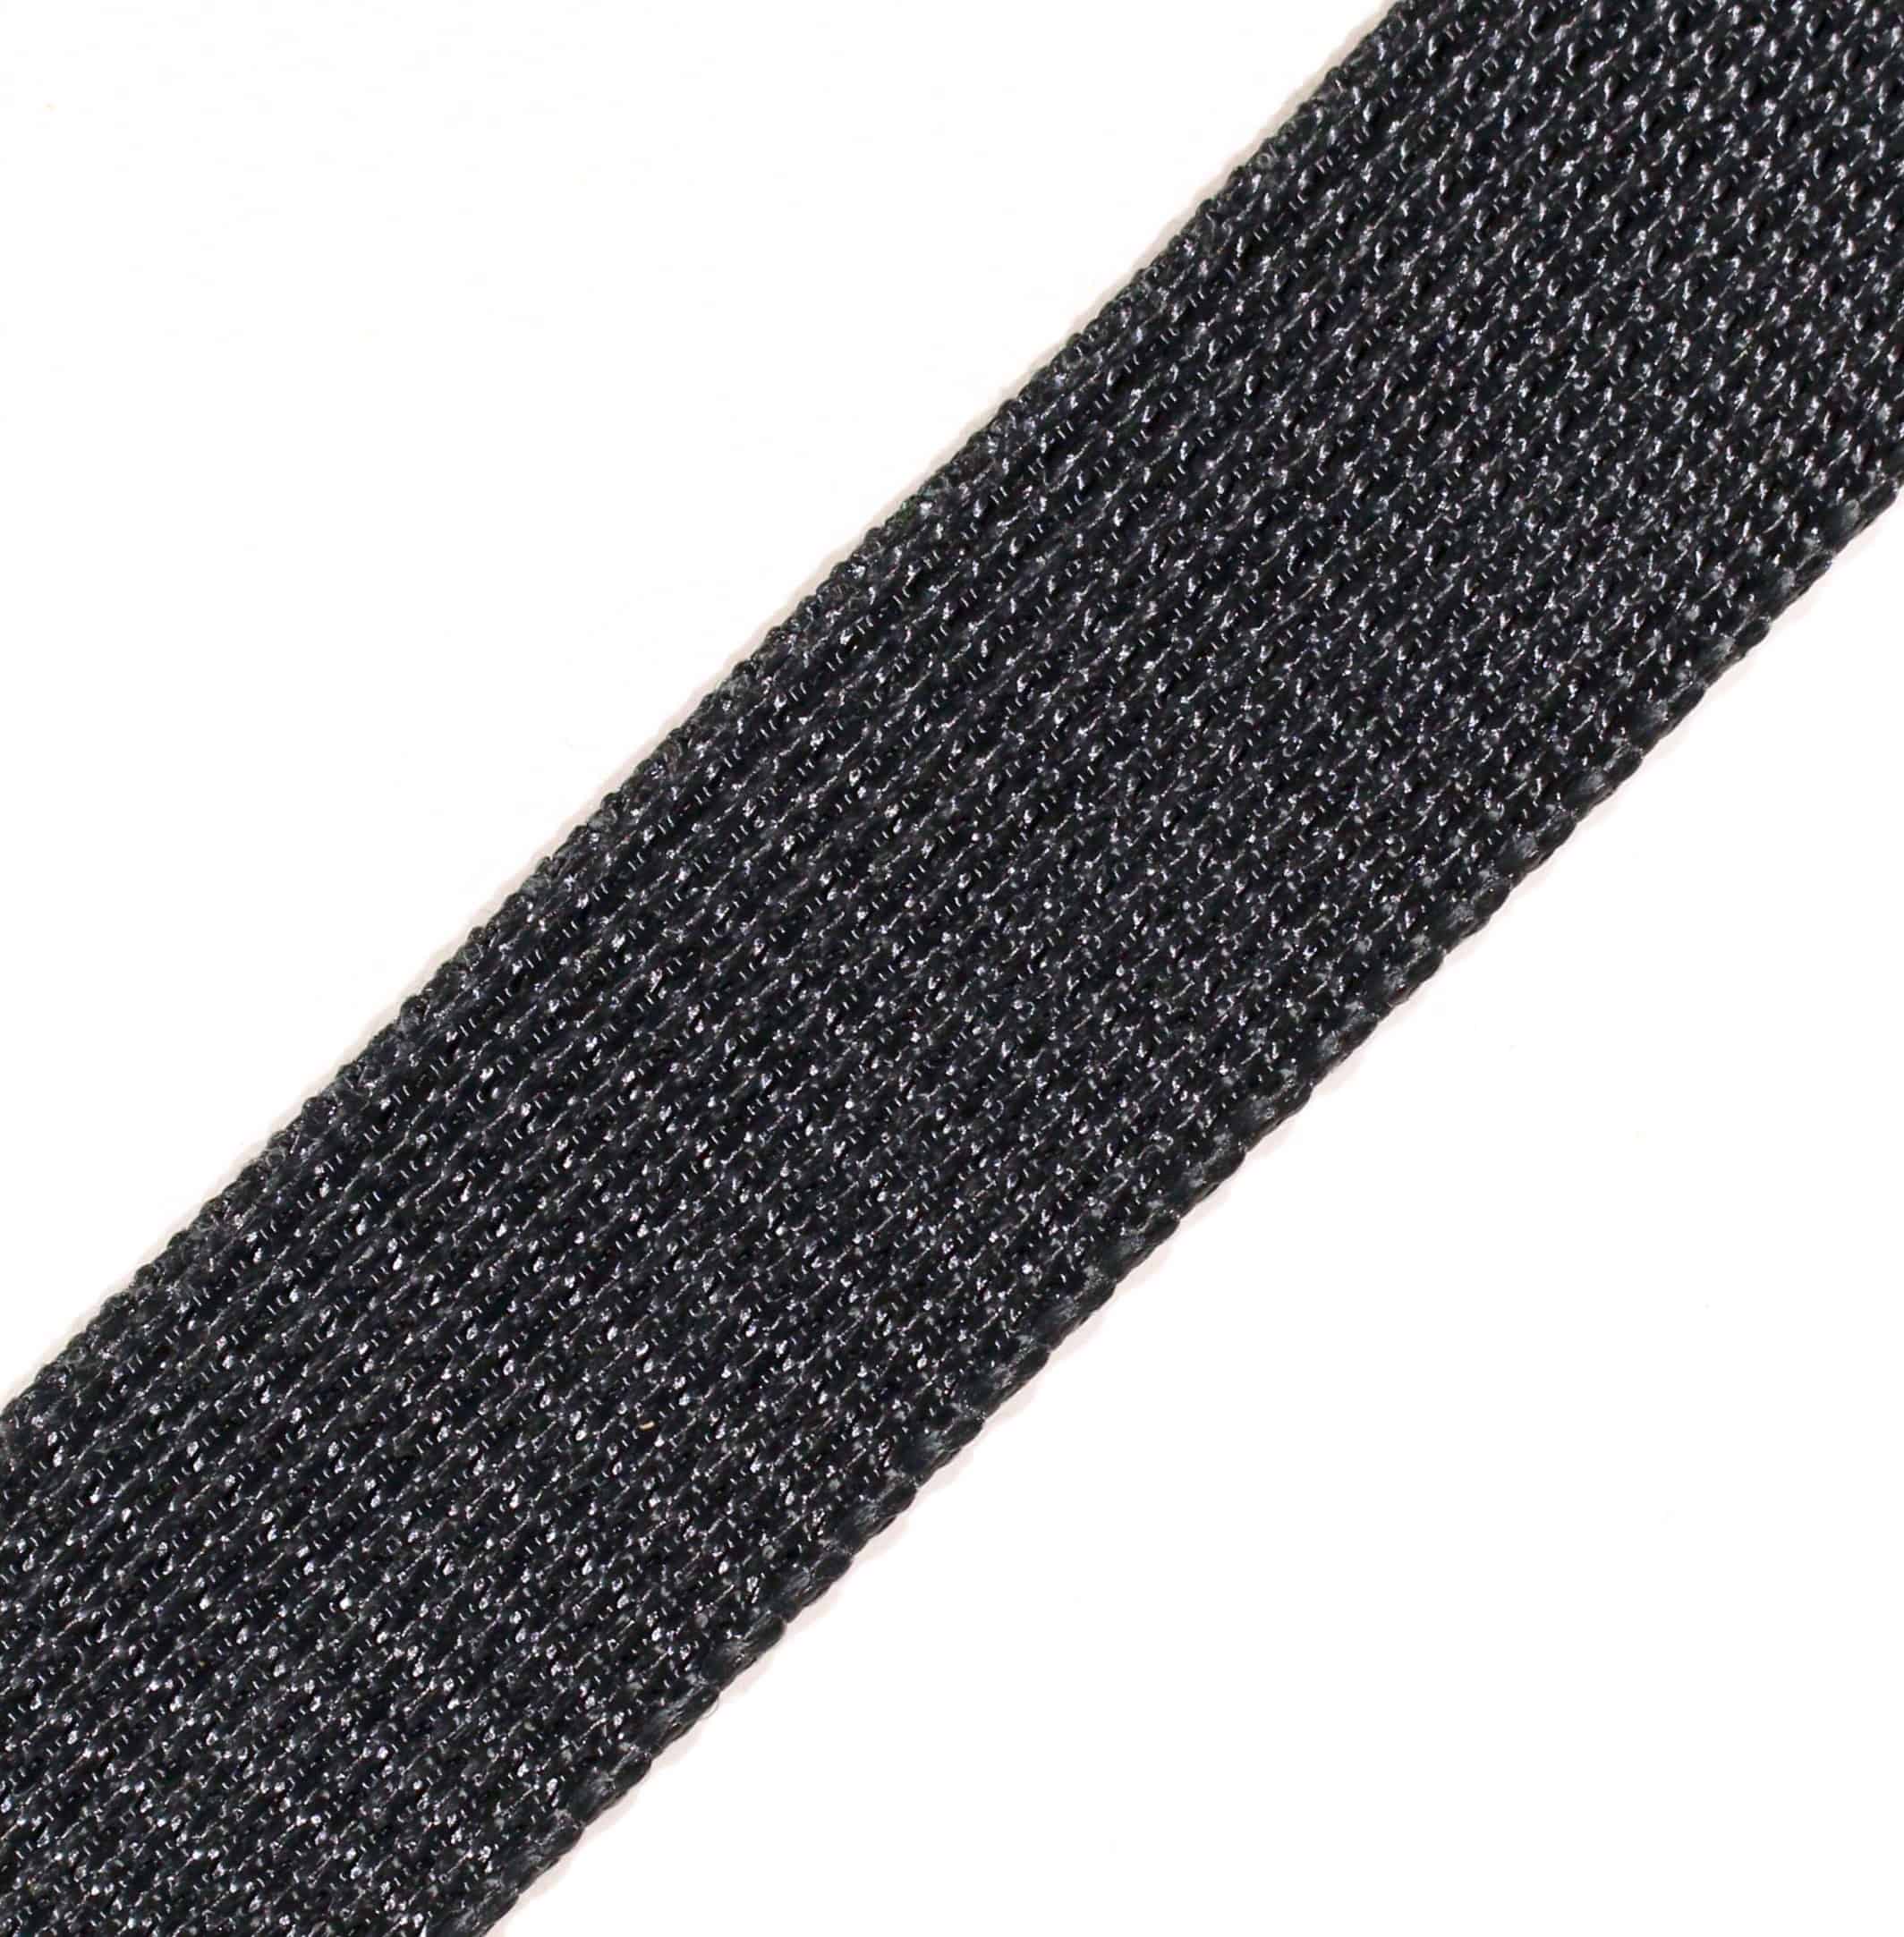 Custom SCBA Webbing and Elastic from Sturges Manufacturing